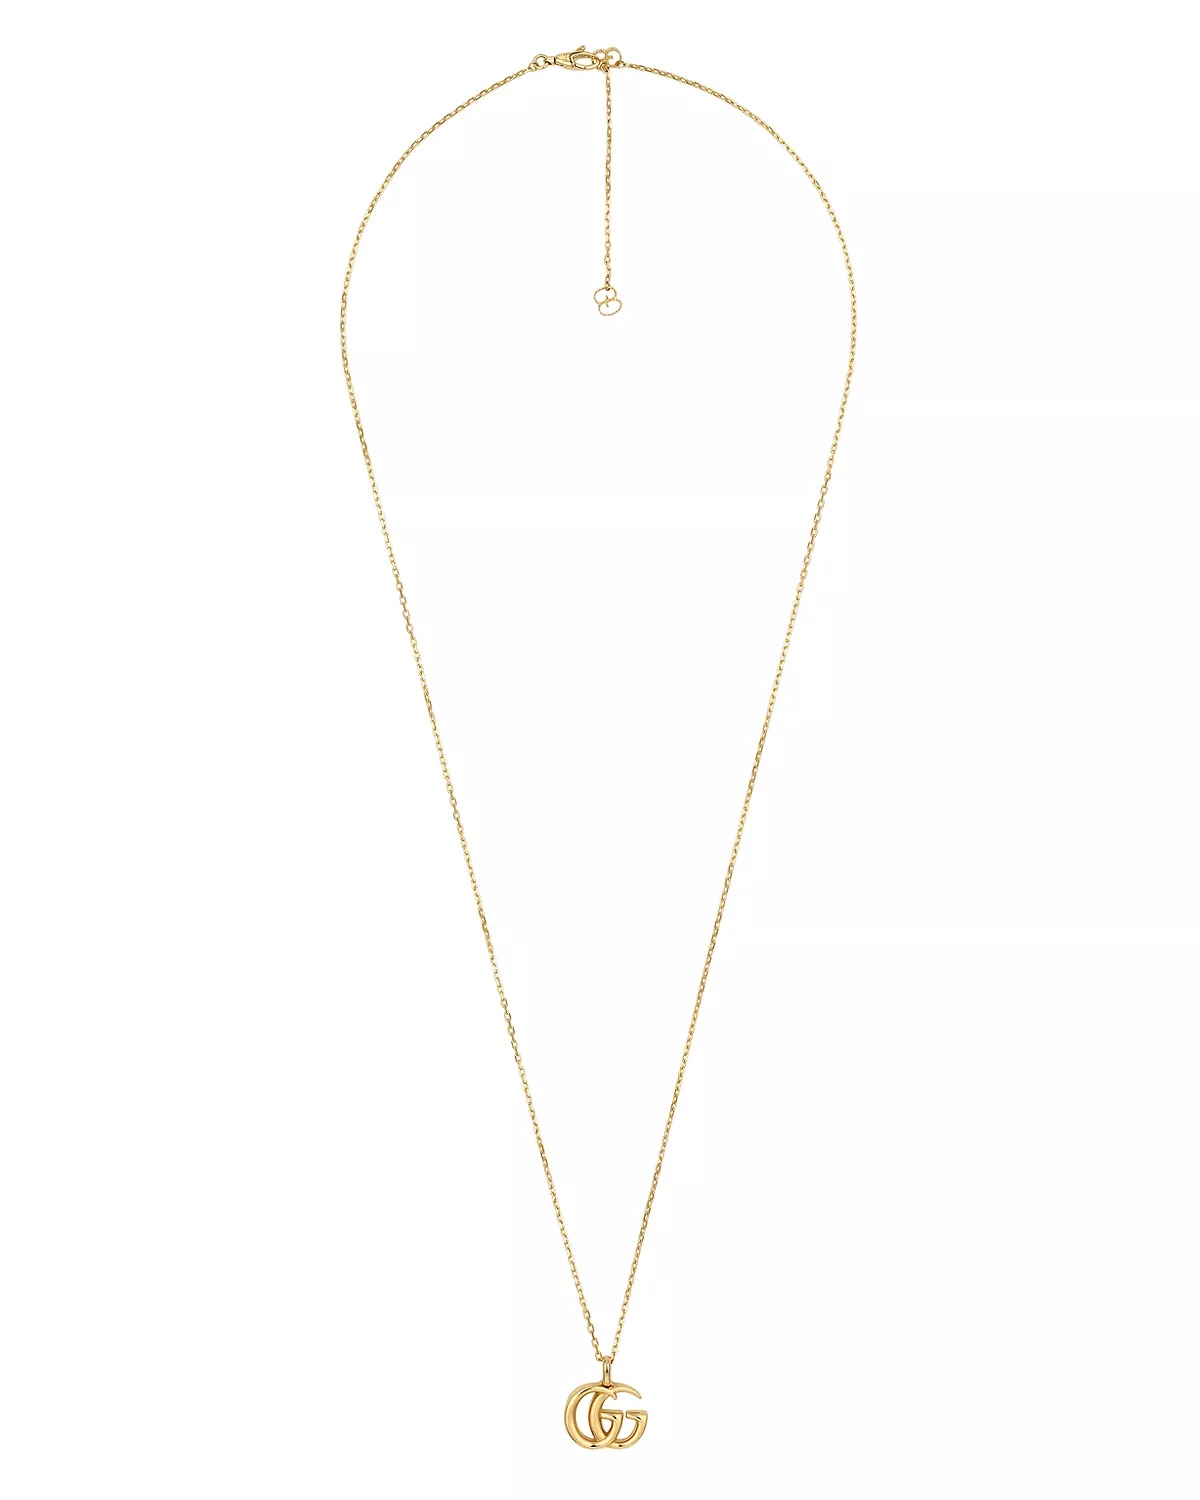 18K Yellow Gold Running G Pendant Necklace, 25.5" - 1